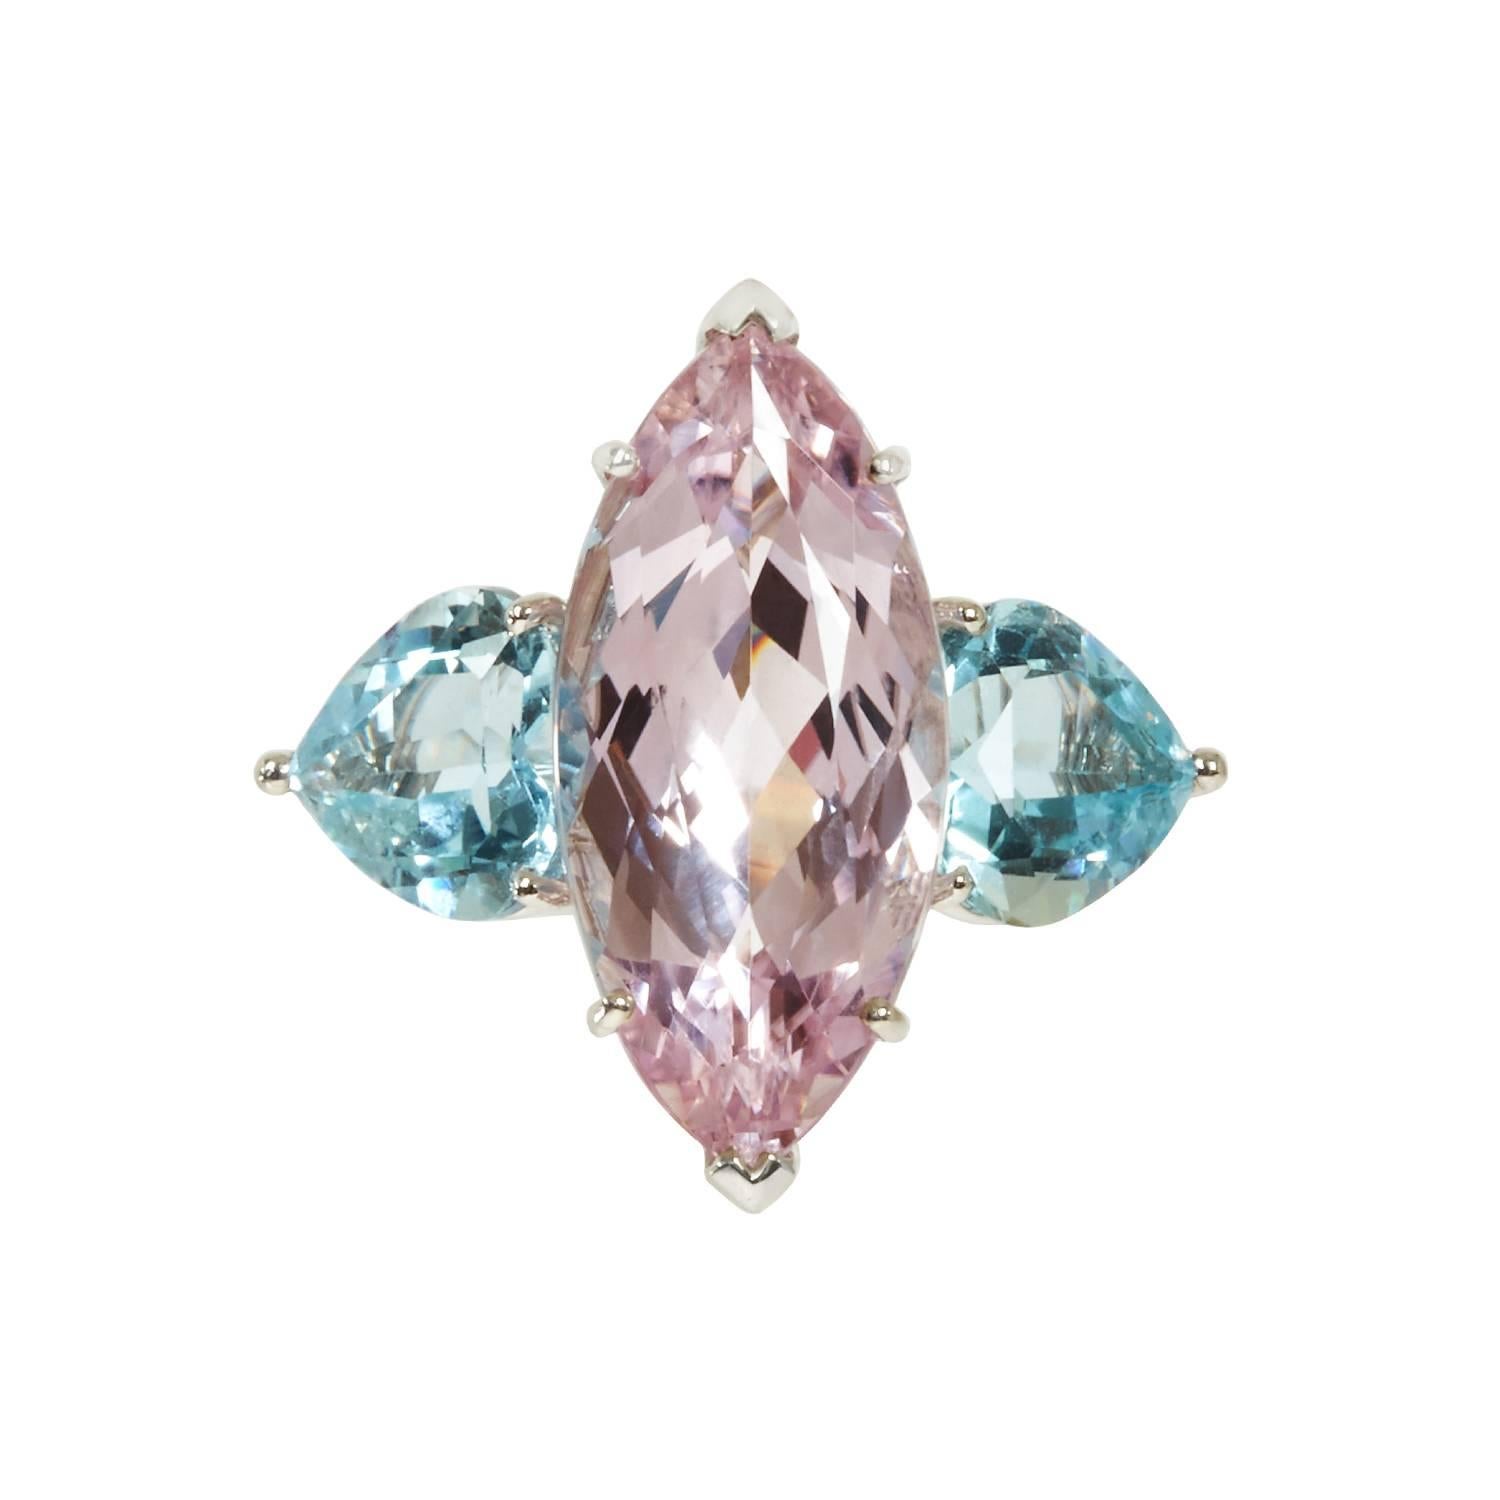 This trio ensemble features a marquise-shape kunzite and heart-shape aquamarines on each side. It's subtle and sleek design makes it perfect for any occassion, easy to style for a day or night look. 

Matching earrings are available. 

Finger